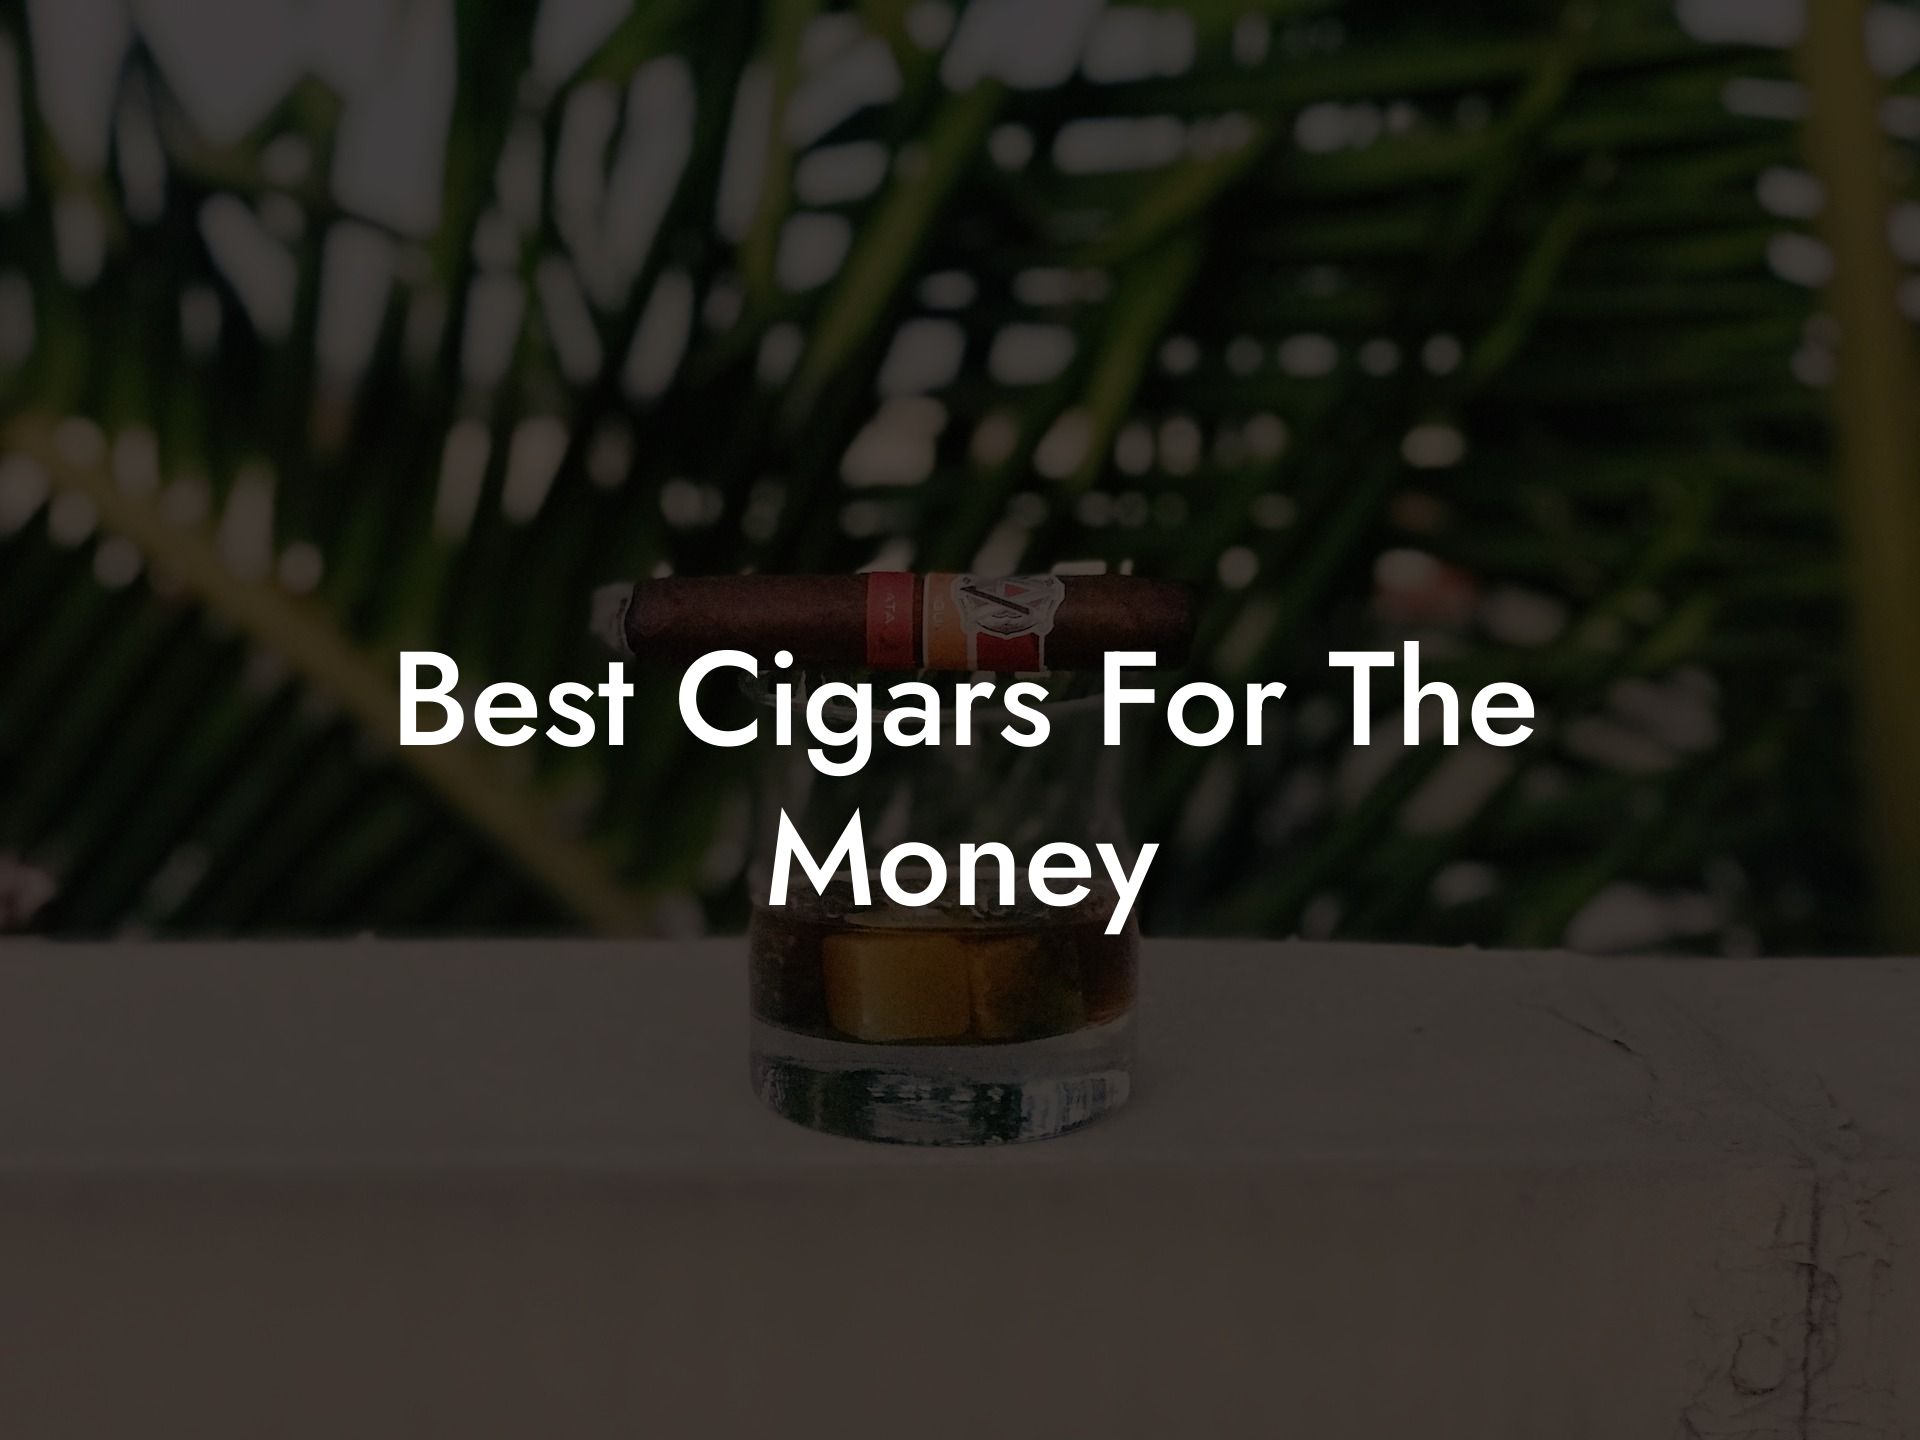 Best Cigars For The Money